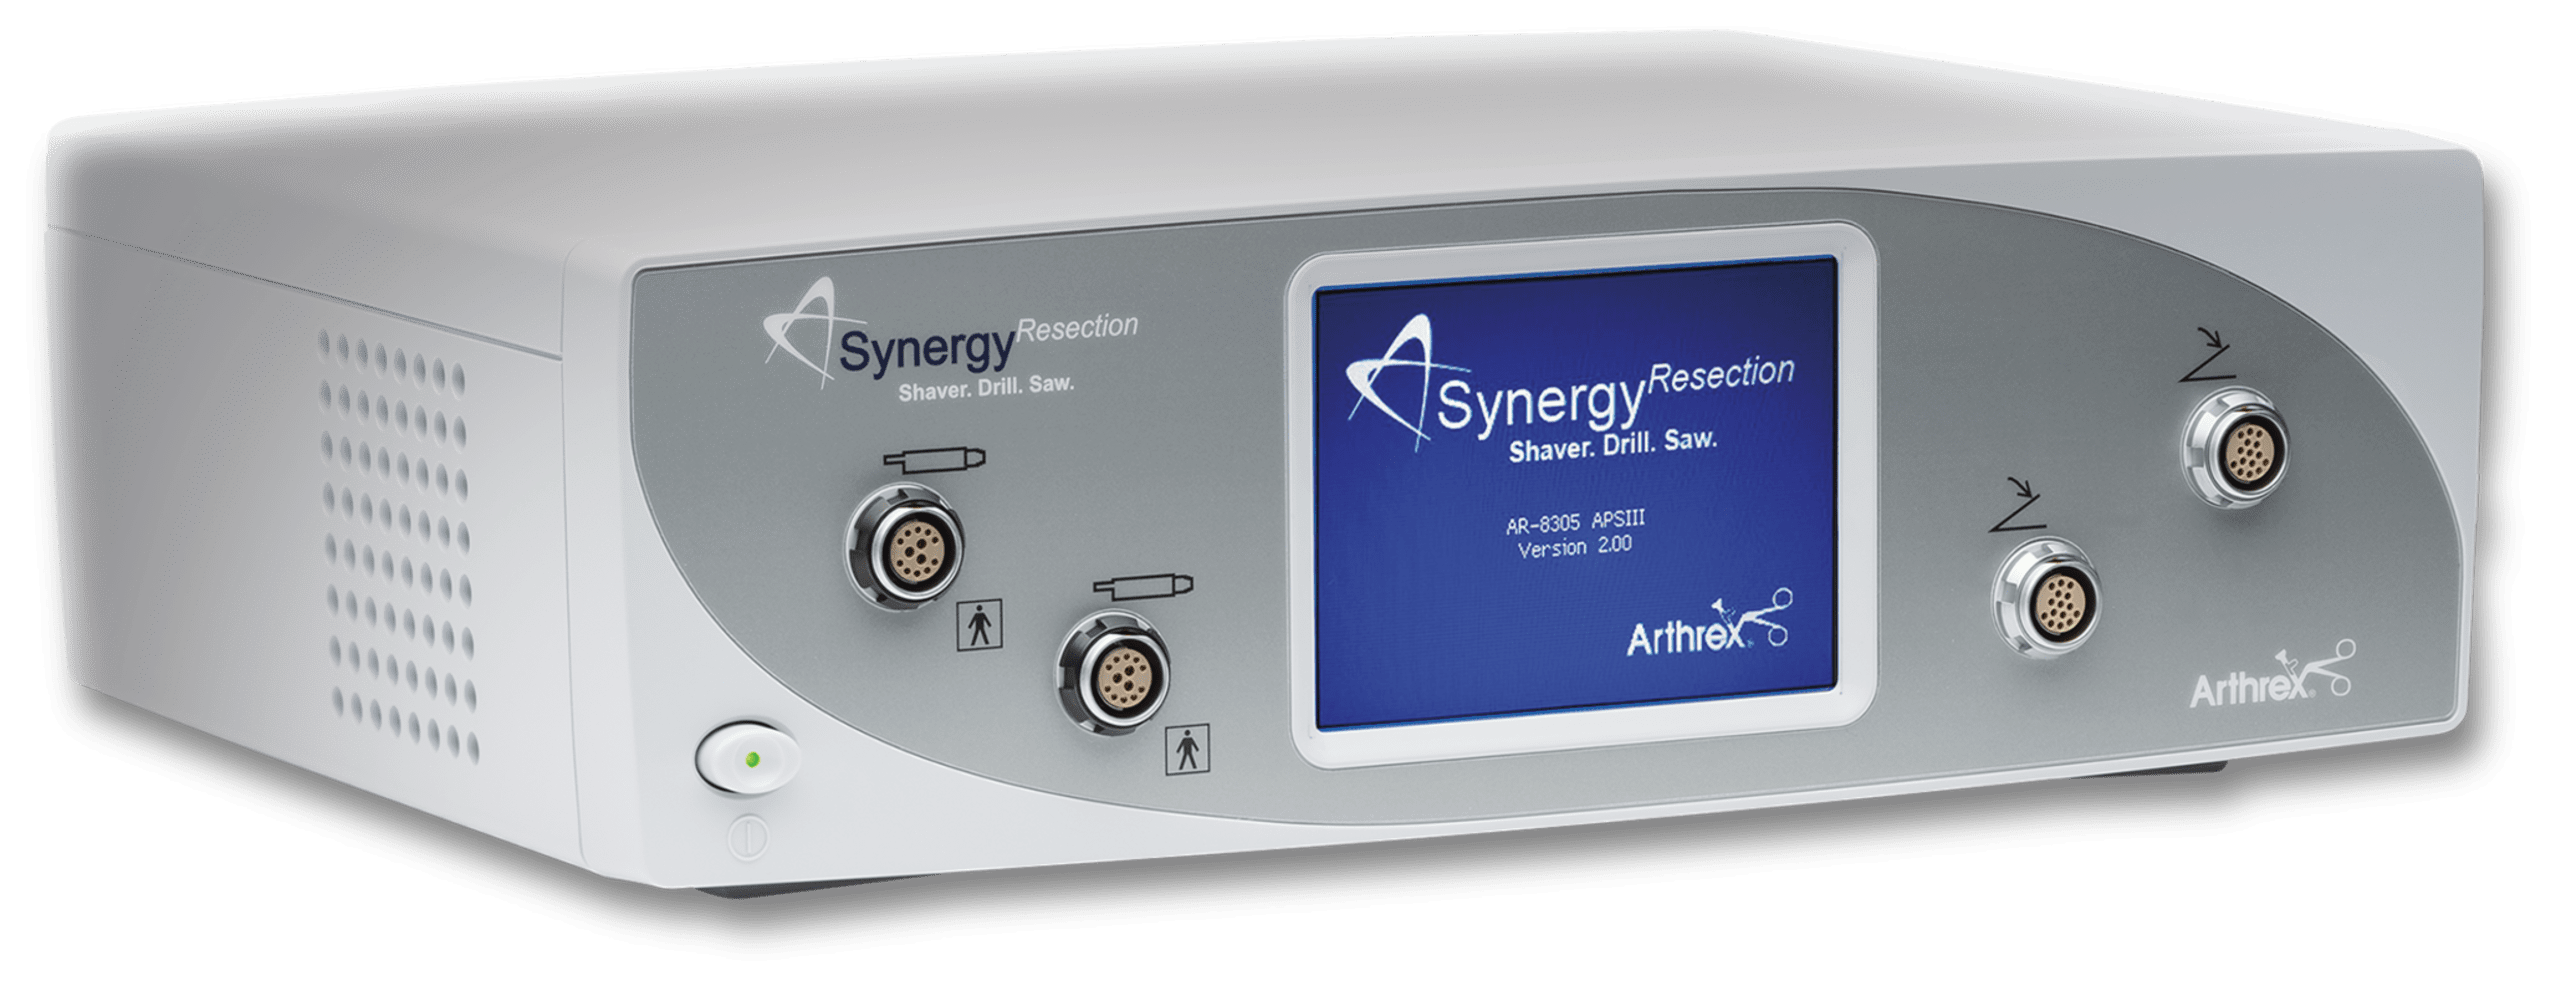 Synergy Shaver Konsole